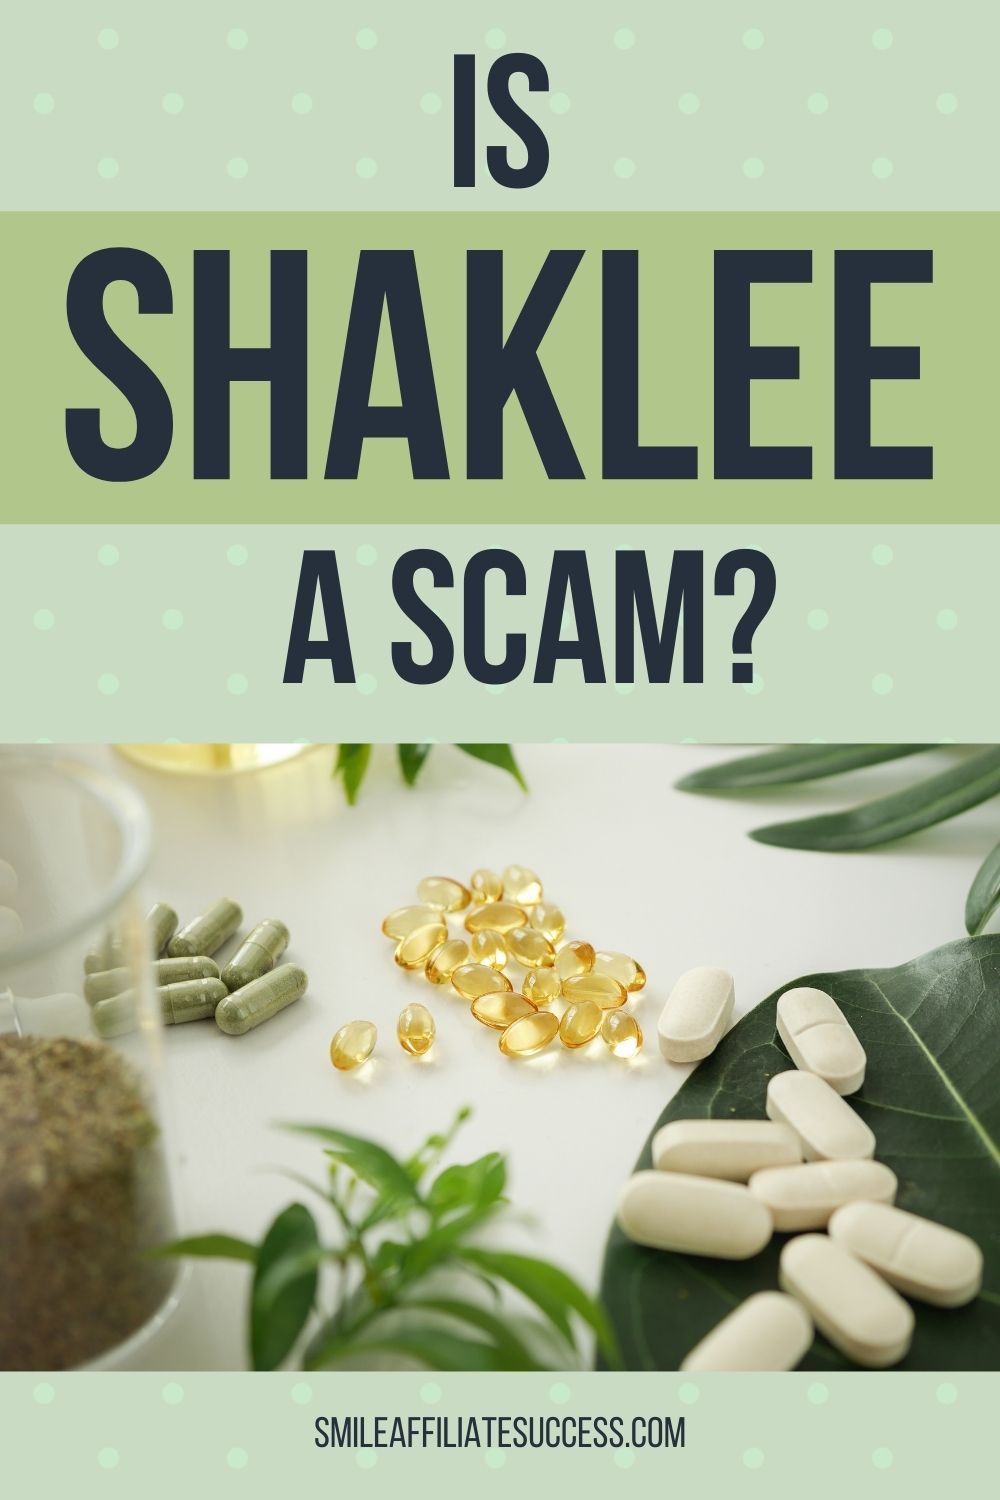 Is Shaklee A Scam?